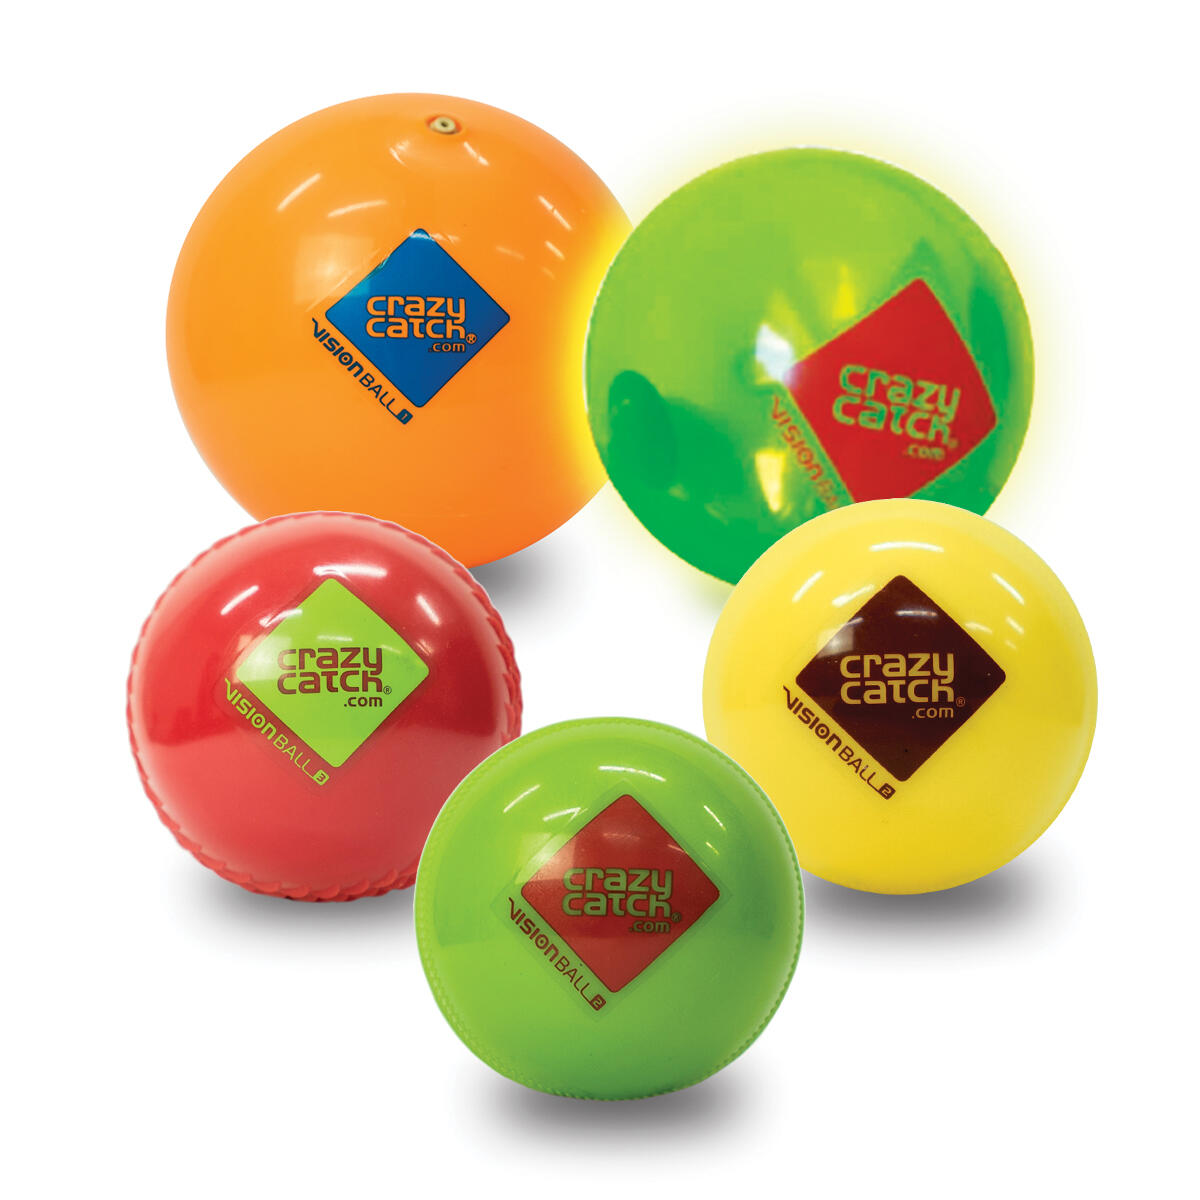 CRAZYCATCH Crazy Catch Vision Ball Ultimate 5 Pack